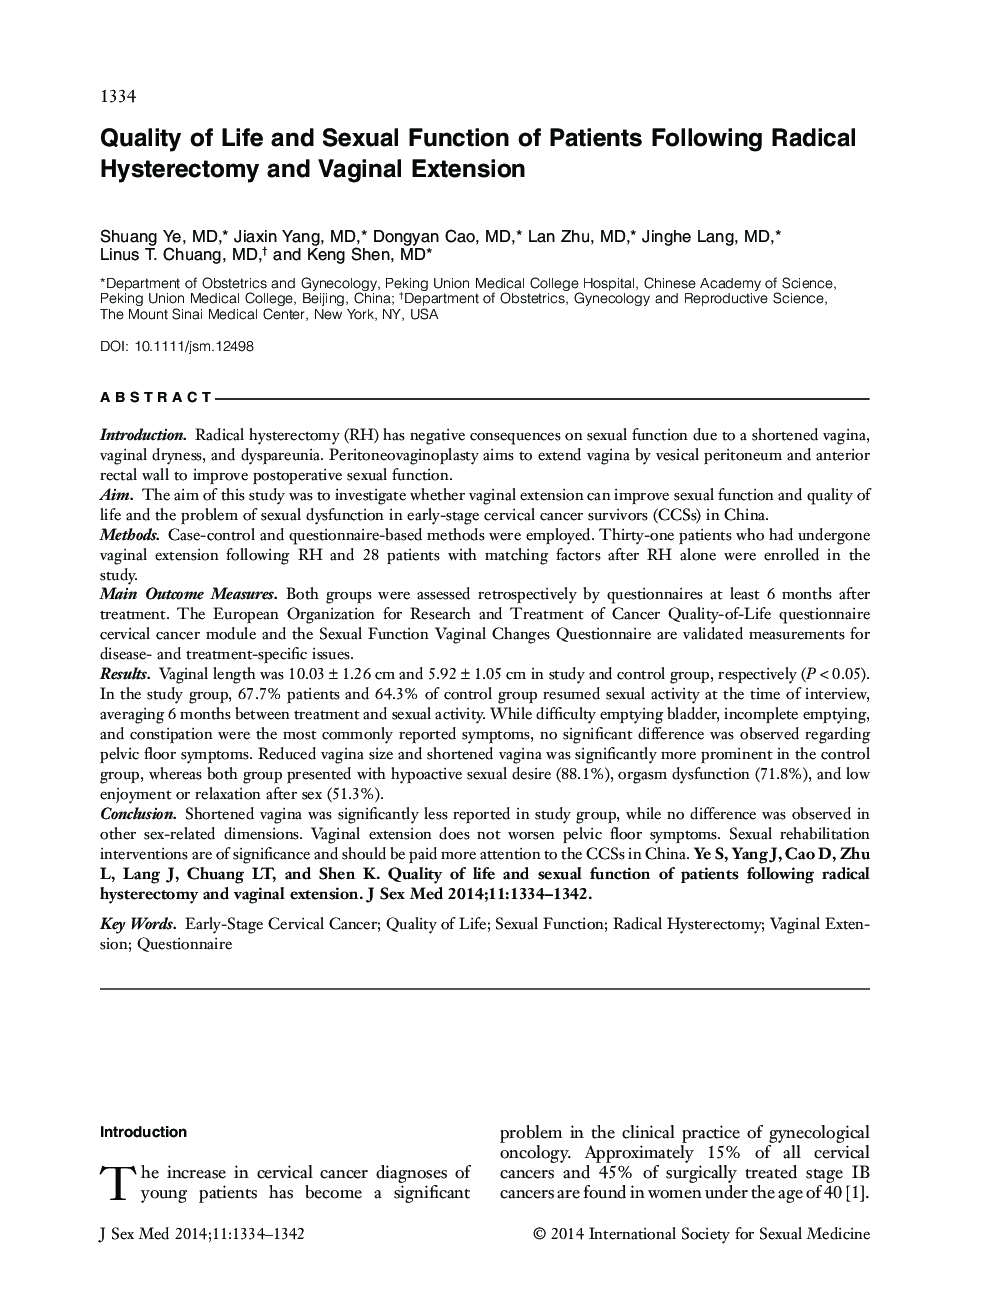 Quality of Life and Sexual Function of Patients Following Radical Hysterectomy and Vaginal Extension 